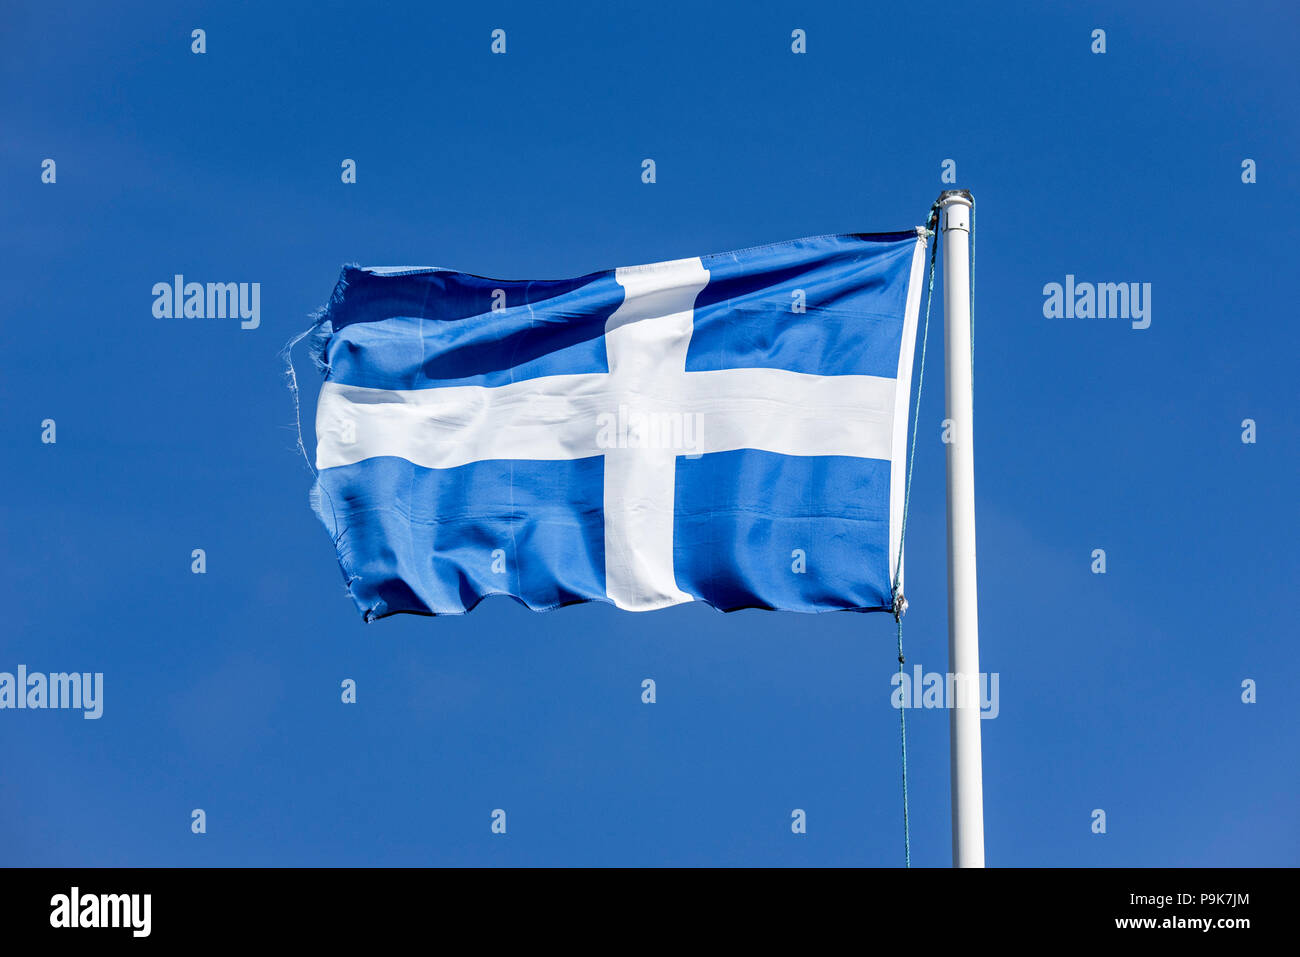 Worn flag of Shetland, white Nordic cross on a blue background, blowing in the wind against blue sky, Shetland Islands, Scotland, UK Stock Photo